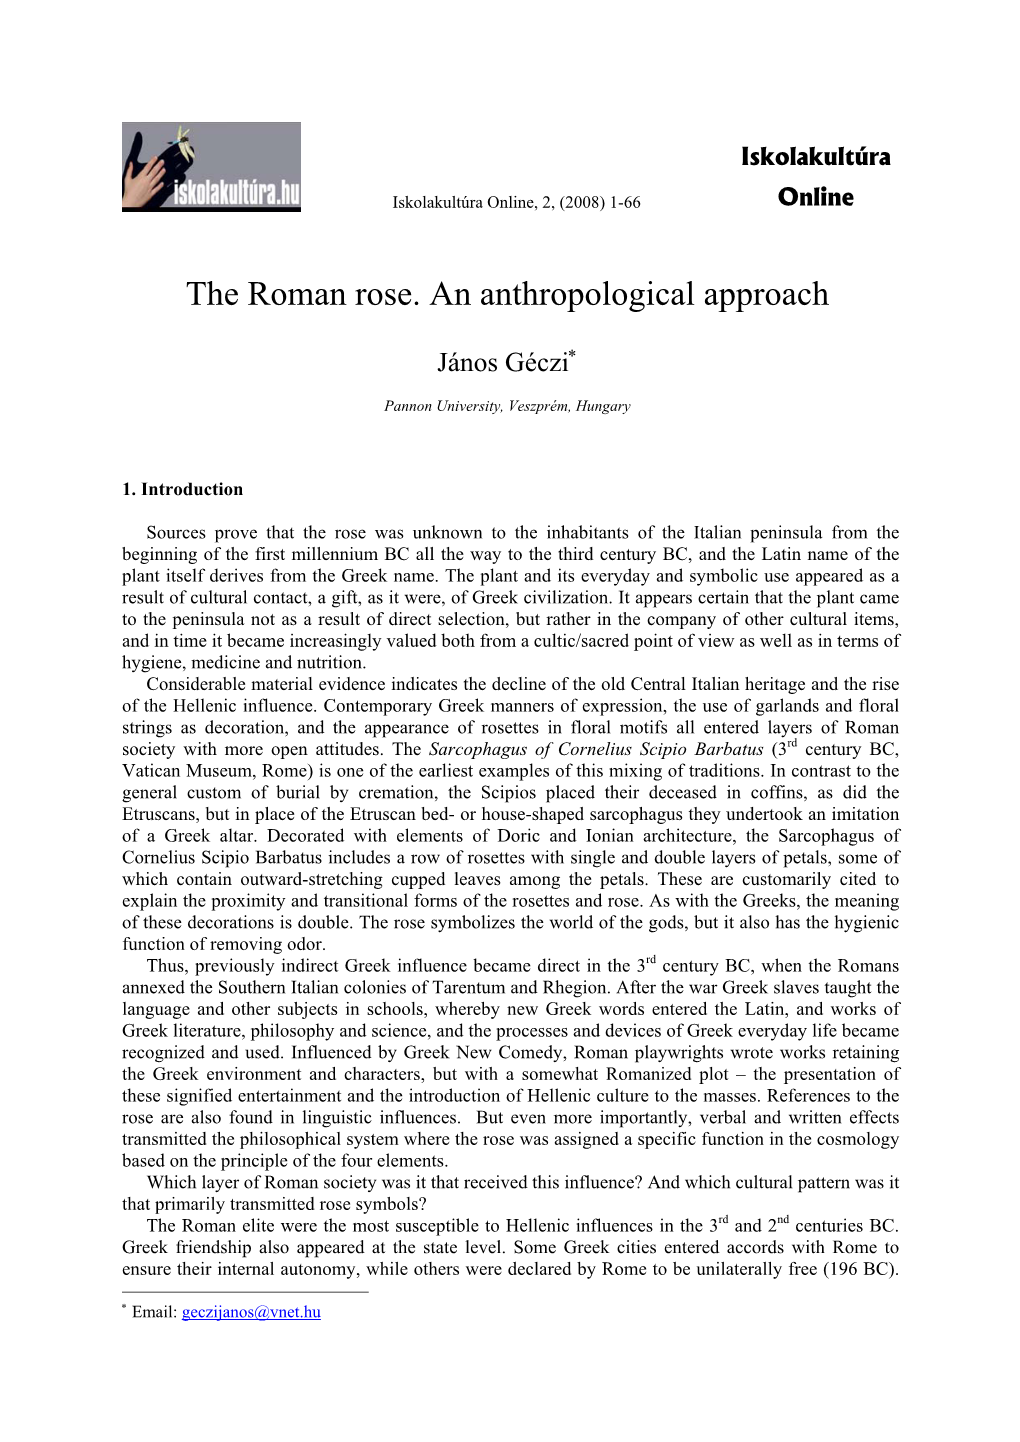 The Roman Rose. an Anthropological Approach